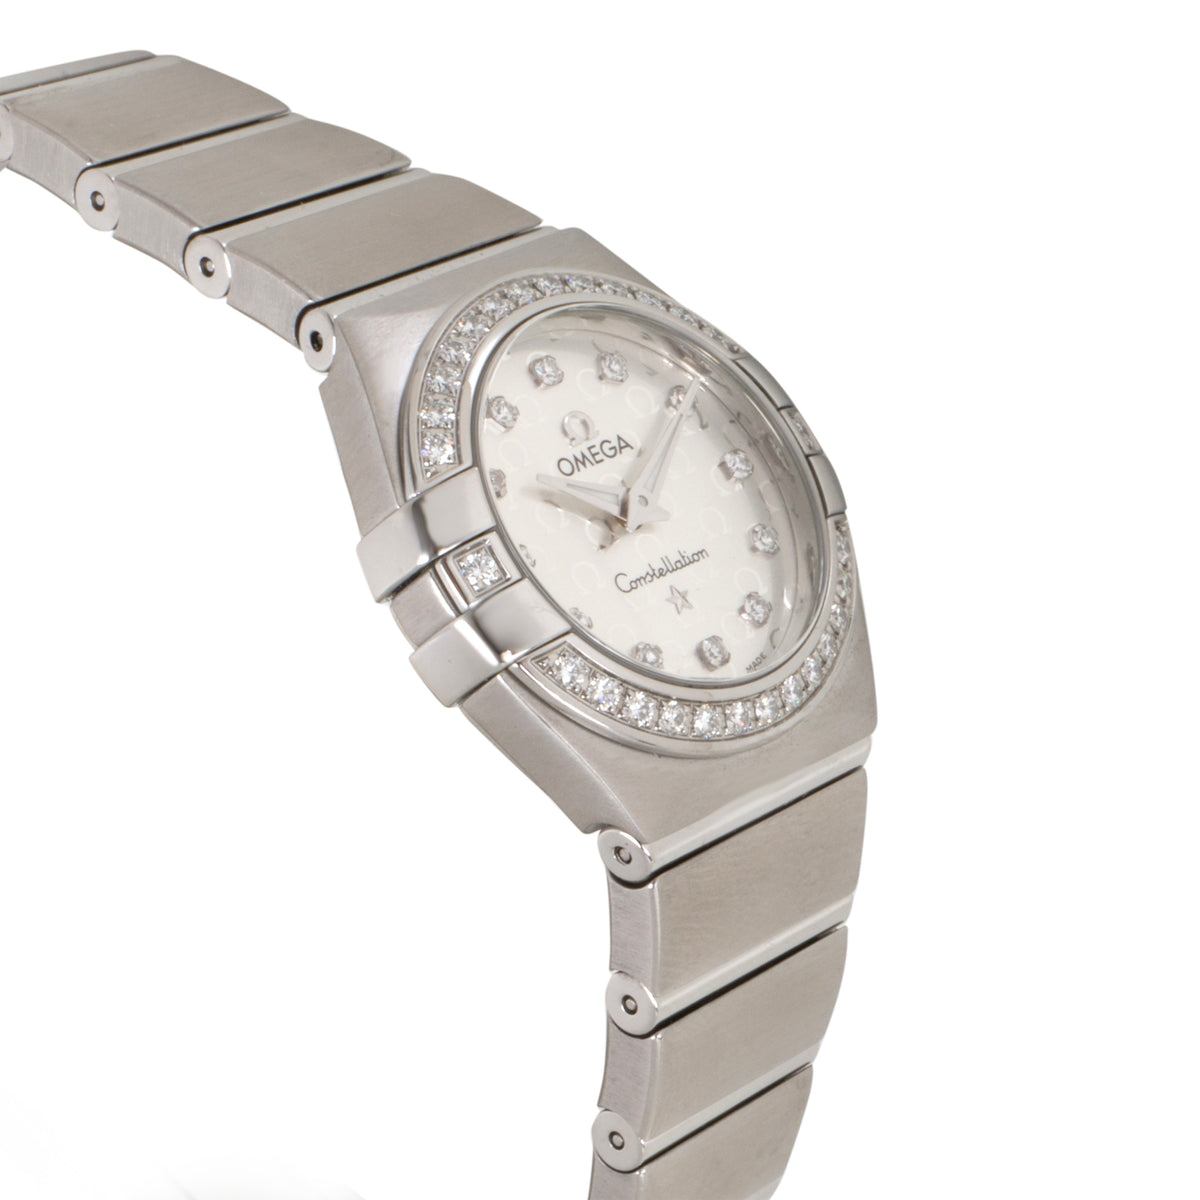 Omega Constellation 123.15.24.60.52.001 Women's Watch in Stainless Steel